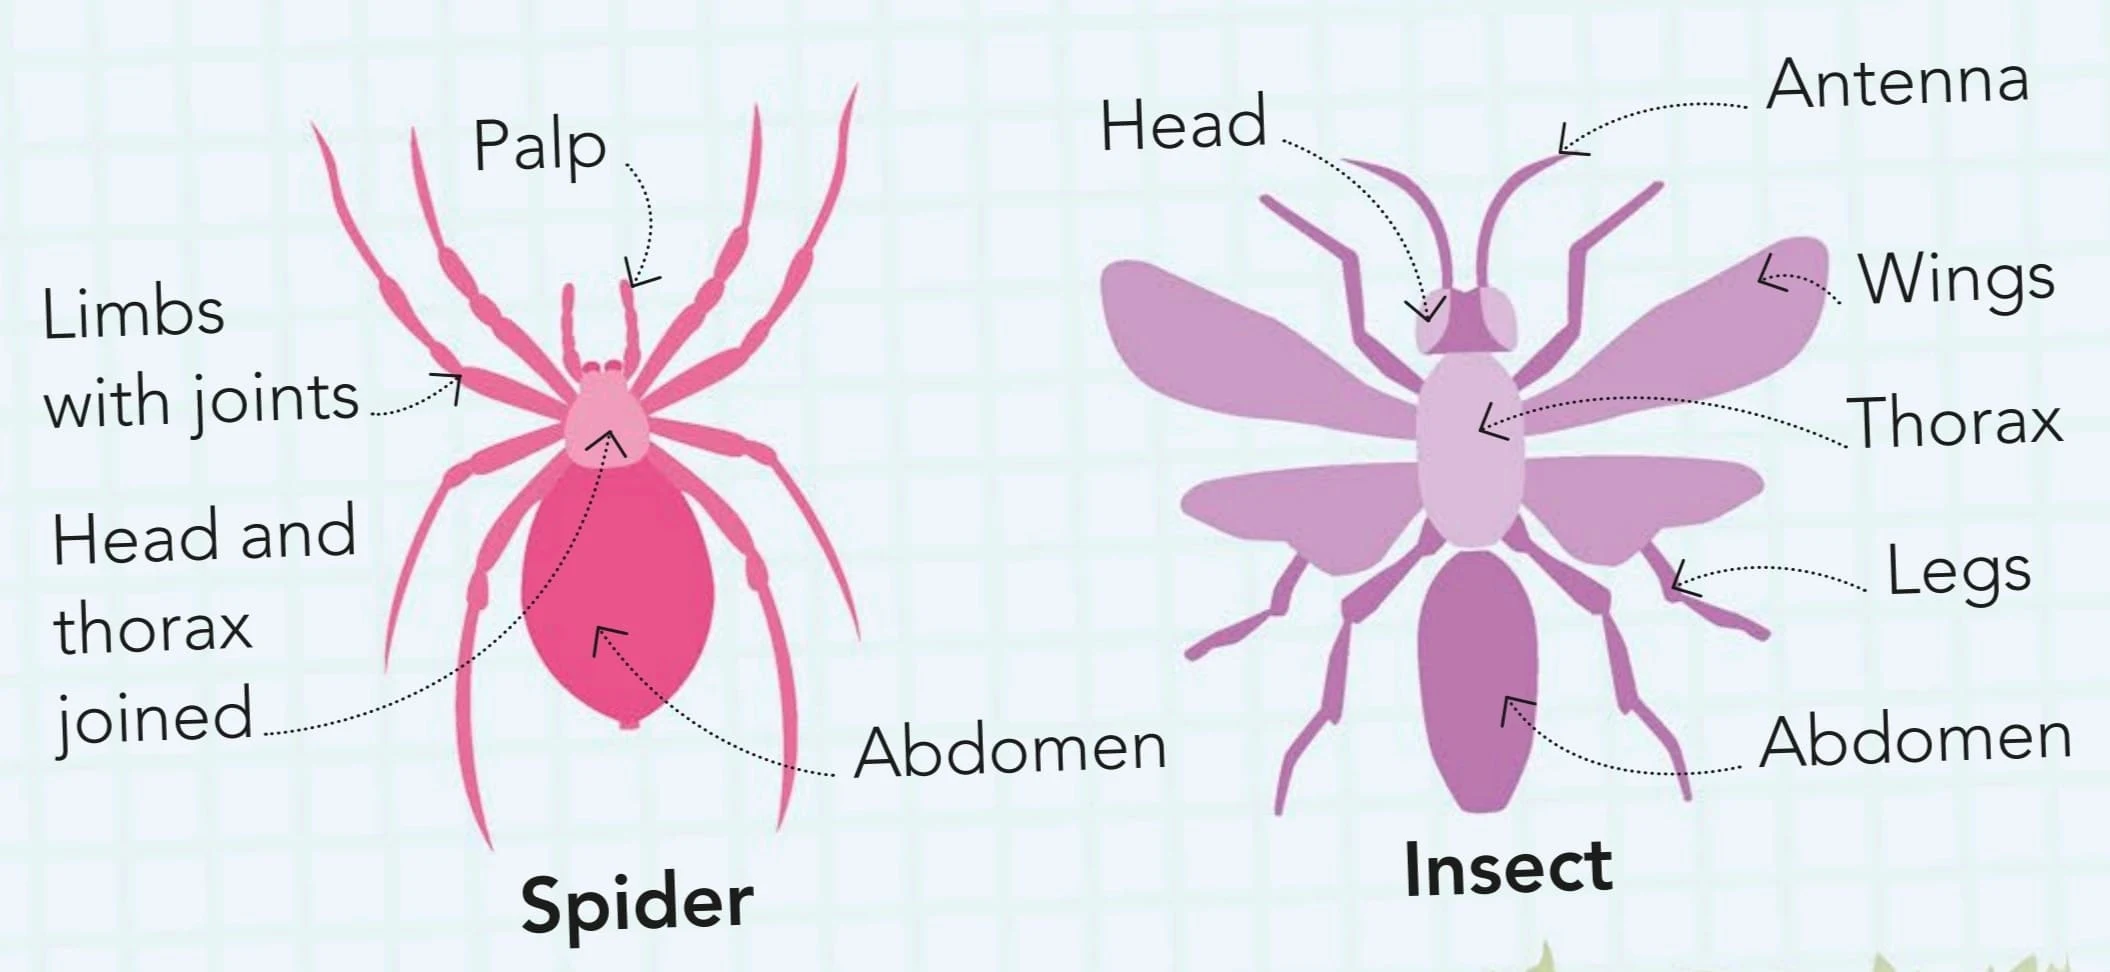 Are spiders insects ?    A spider is different than an insect. It has eight legs instead of six and a body in two parts instead of an insect’s three. Spiders are related to scorpions, ticks, and mites. Together, they form a group called the arachnids.   Body The body of a spider has two parts. One part is made from a head and thorax joined together. The other part is called the abdomen.  Eyes  Most spiders have four pairs of eyes. They are spread around the top of their head so they can see danger from all sides.    Legs Spiders have eight jointed legs—four on each side. The hairs on their legs act like ears, picking up tiny movements in the air.  Insect vs spider     The main differences between insects and spiders are body segments, legs, and wings.     Why do spiders make silk? Female spiders make a silk bed and lay several hundred eggs in it. They wrap it in a silk ball and hang it somewhere safe.     To make webs Spiders release silk to make sticky webs and nets to catch their food. They wrap trapped insects in silk and eat them later.   True or false?  1. Some types of spiders have wings. 2. All spiders can make silk. 3. Spiders and insects both have a protective outer shell called an exoskeleton.